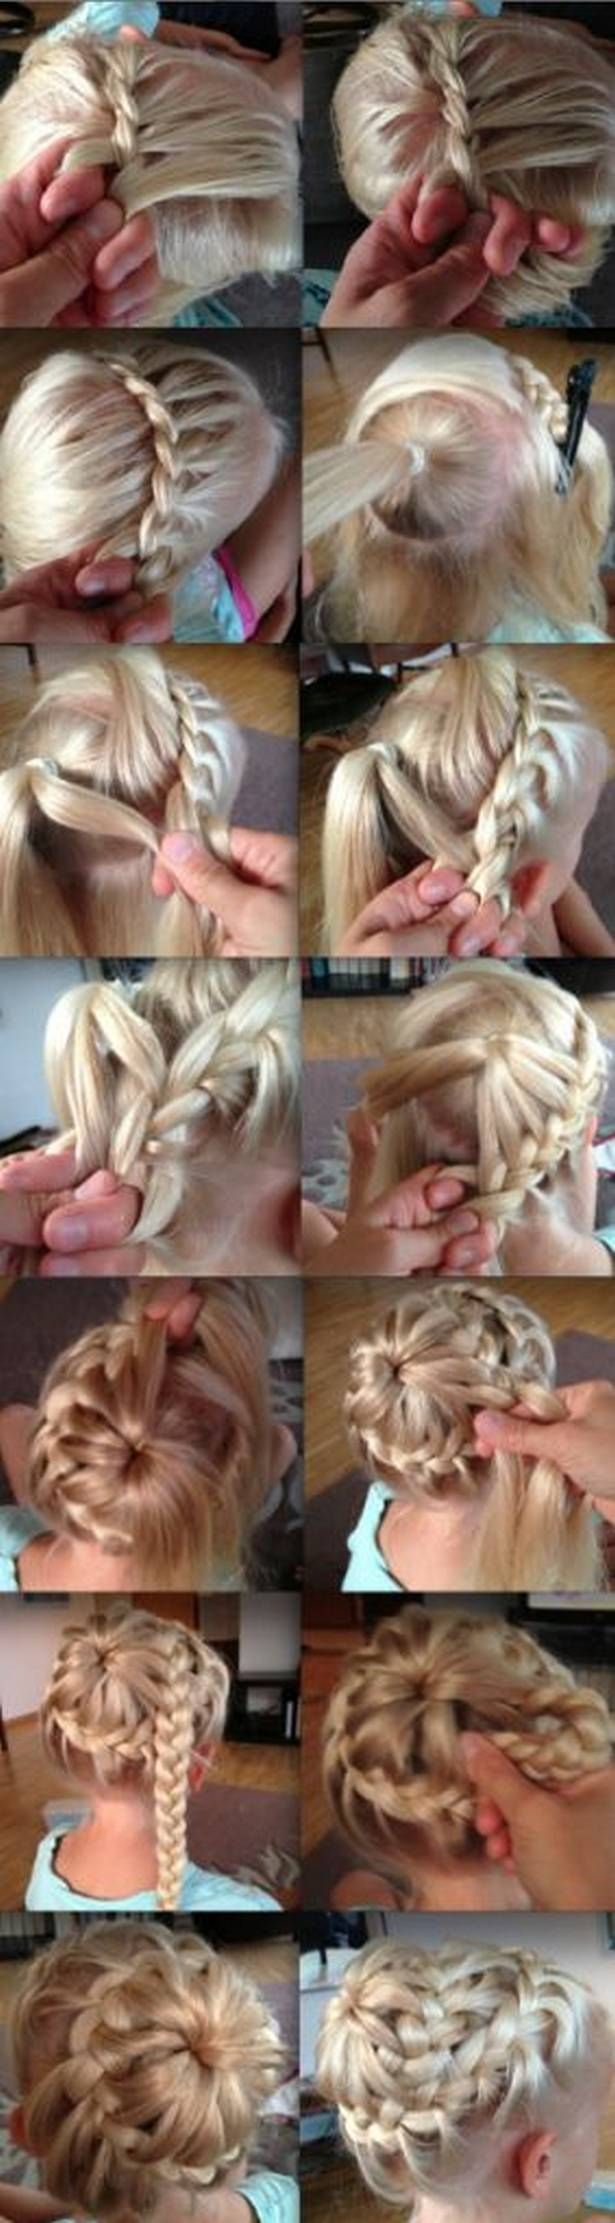 Make Your Hair Look Gorgeous By Following Our Tips And DIY Hair Tricks